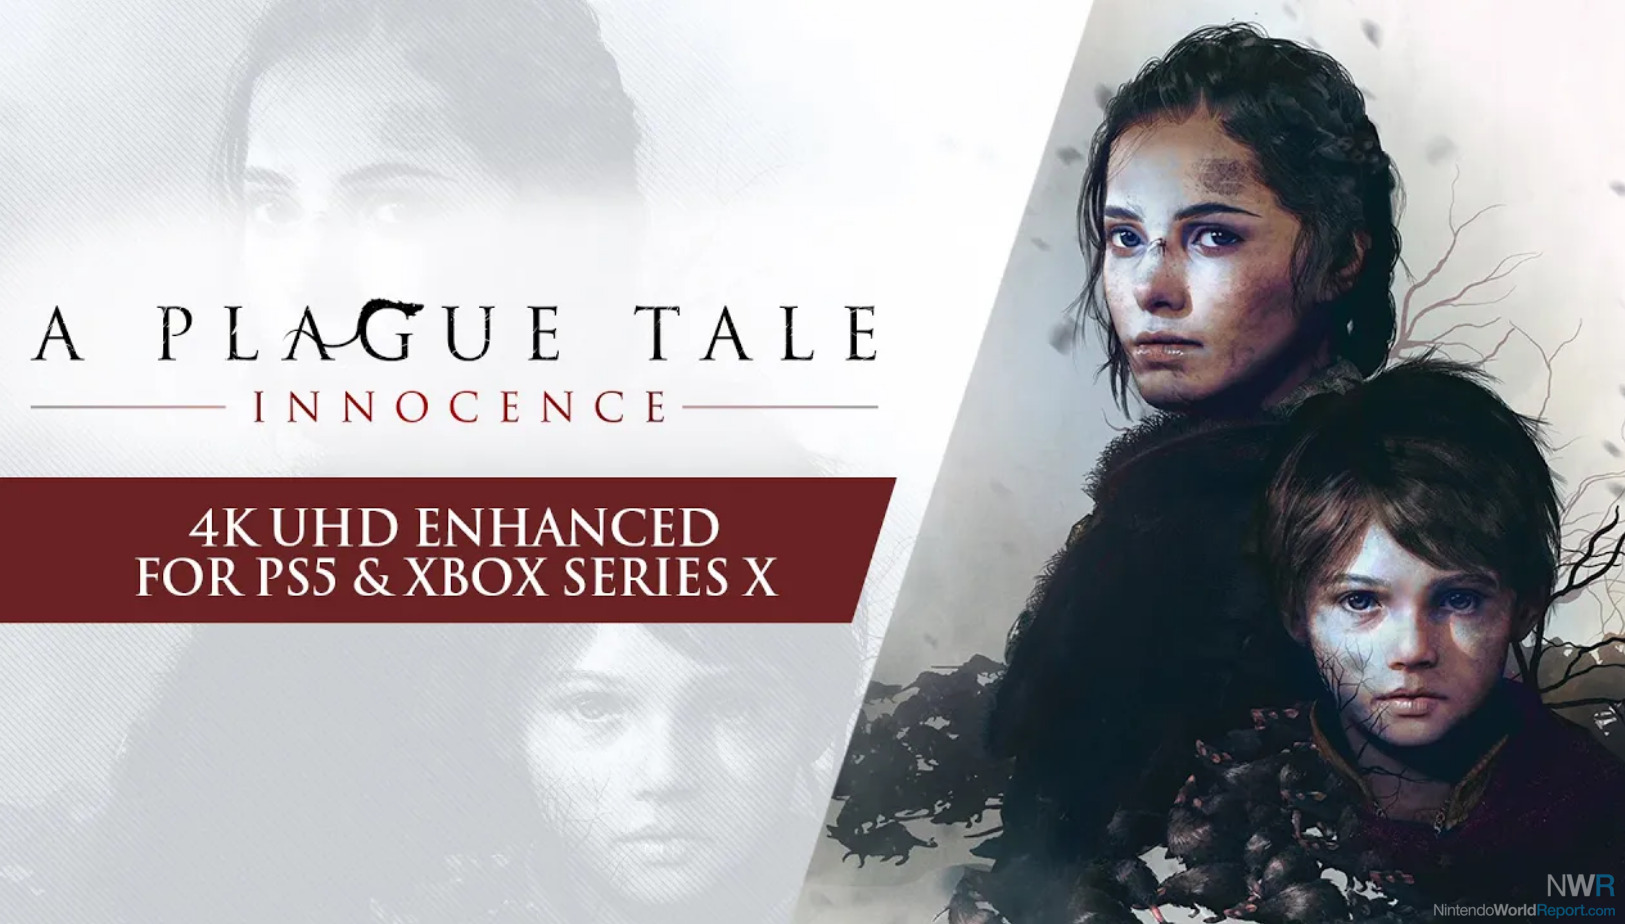 A Plague Tale: Requiem Announced For Switch As Streaming Title - News -  Nintendo World Report